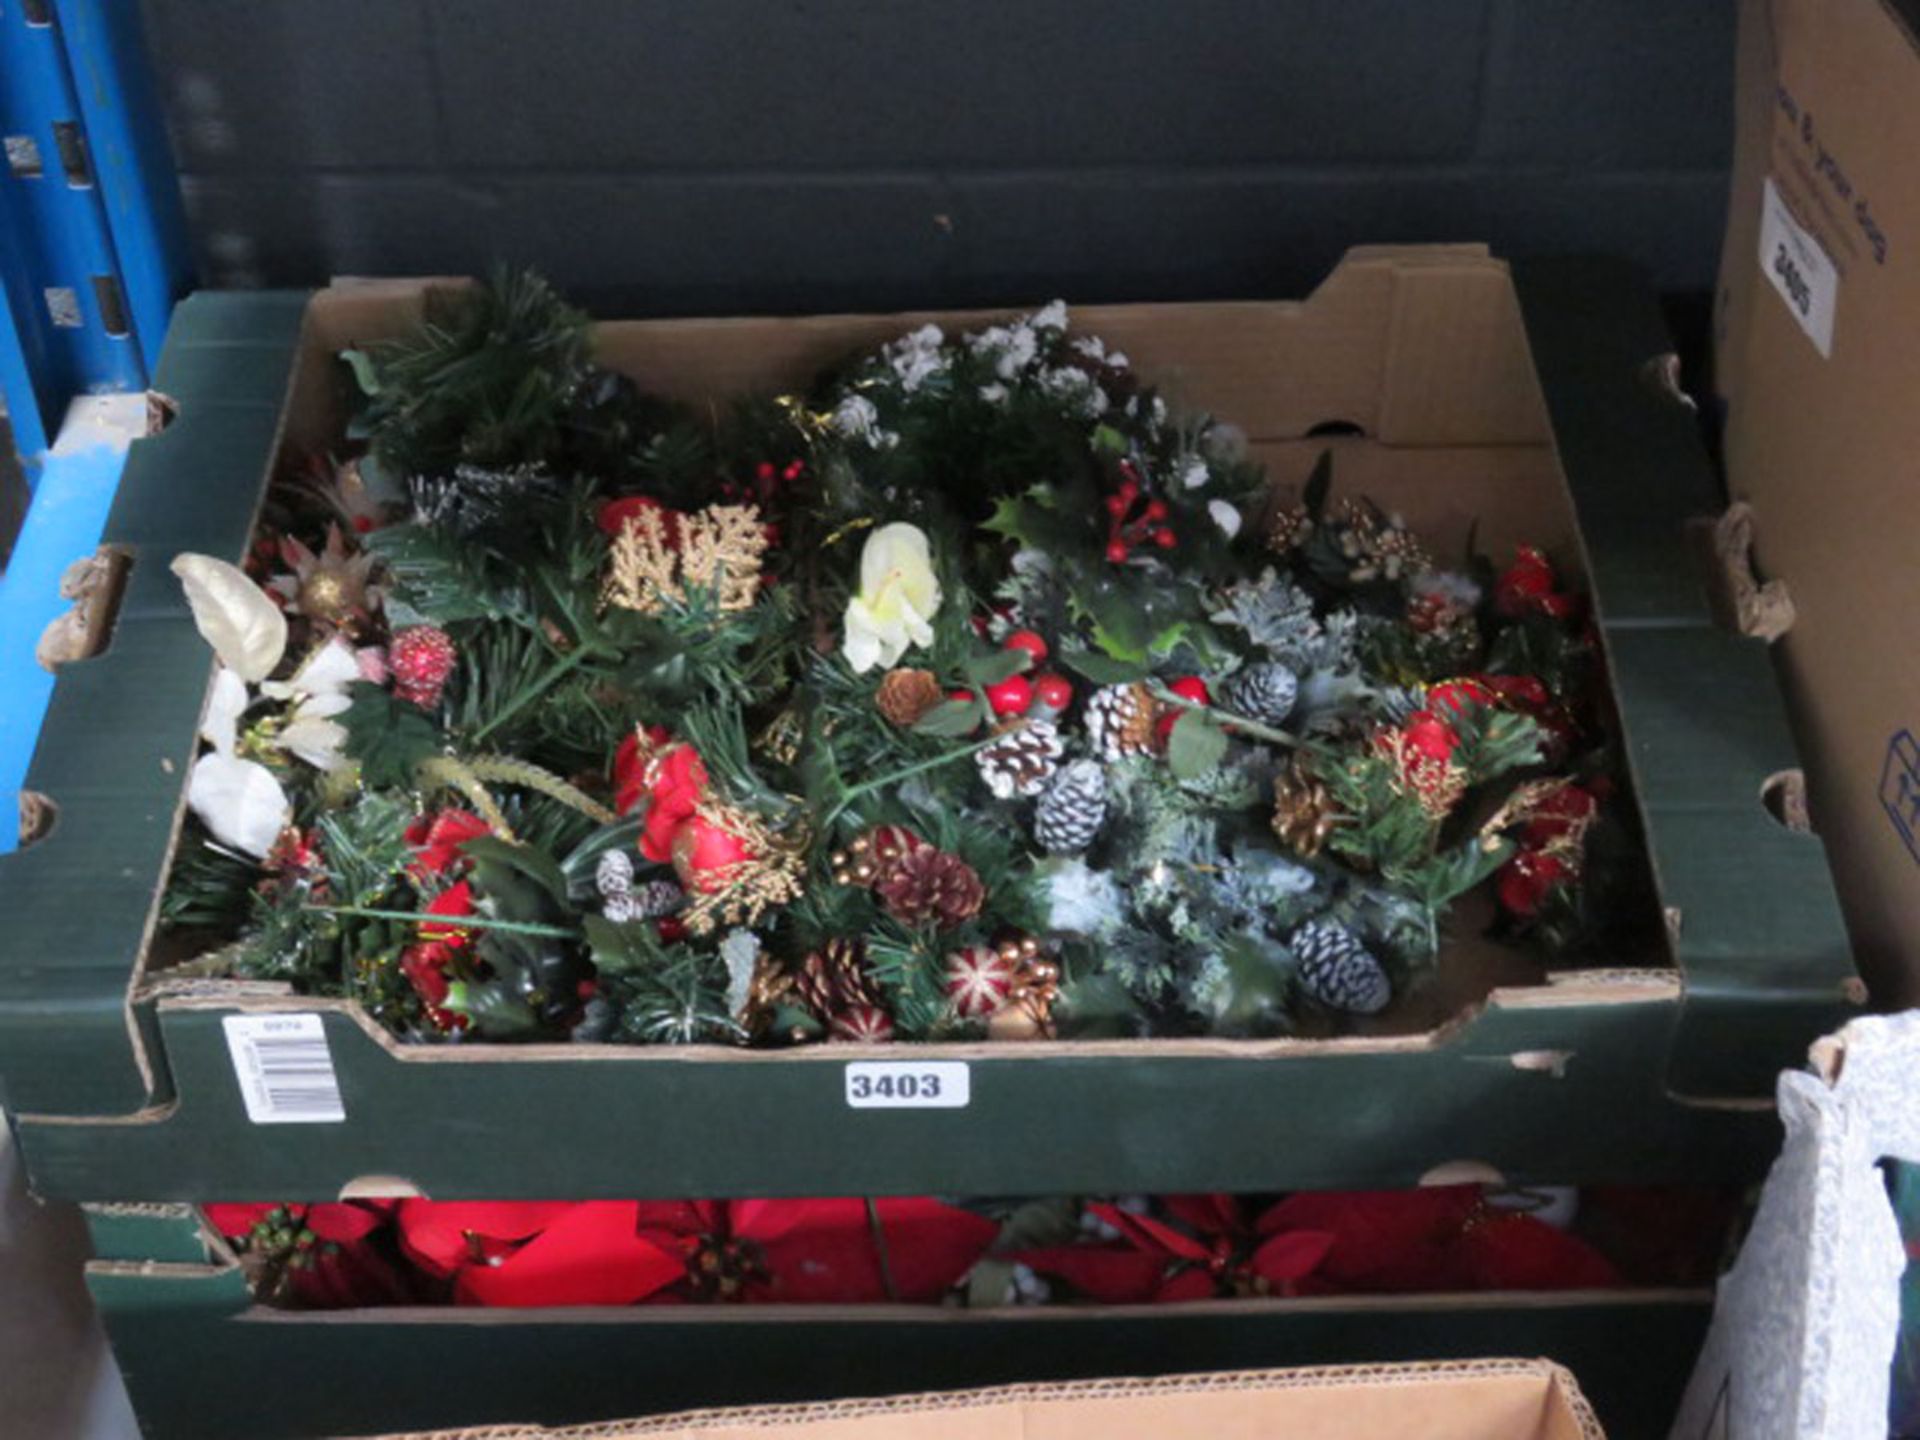 2 Trays of Christmas decorations